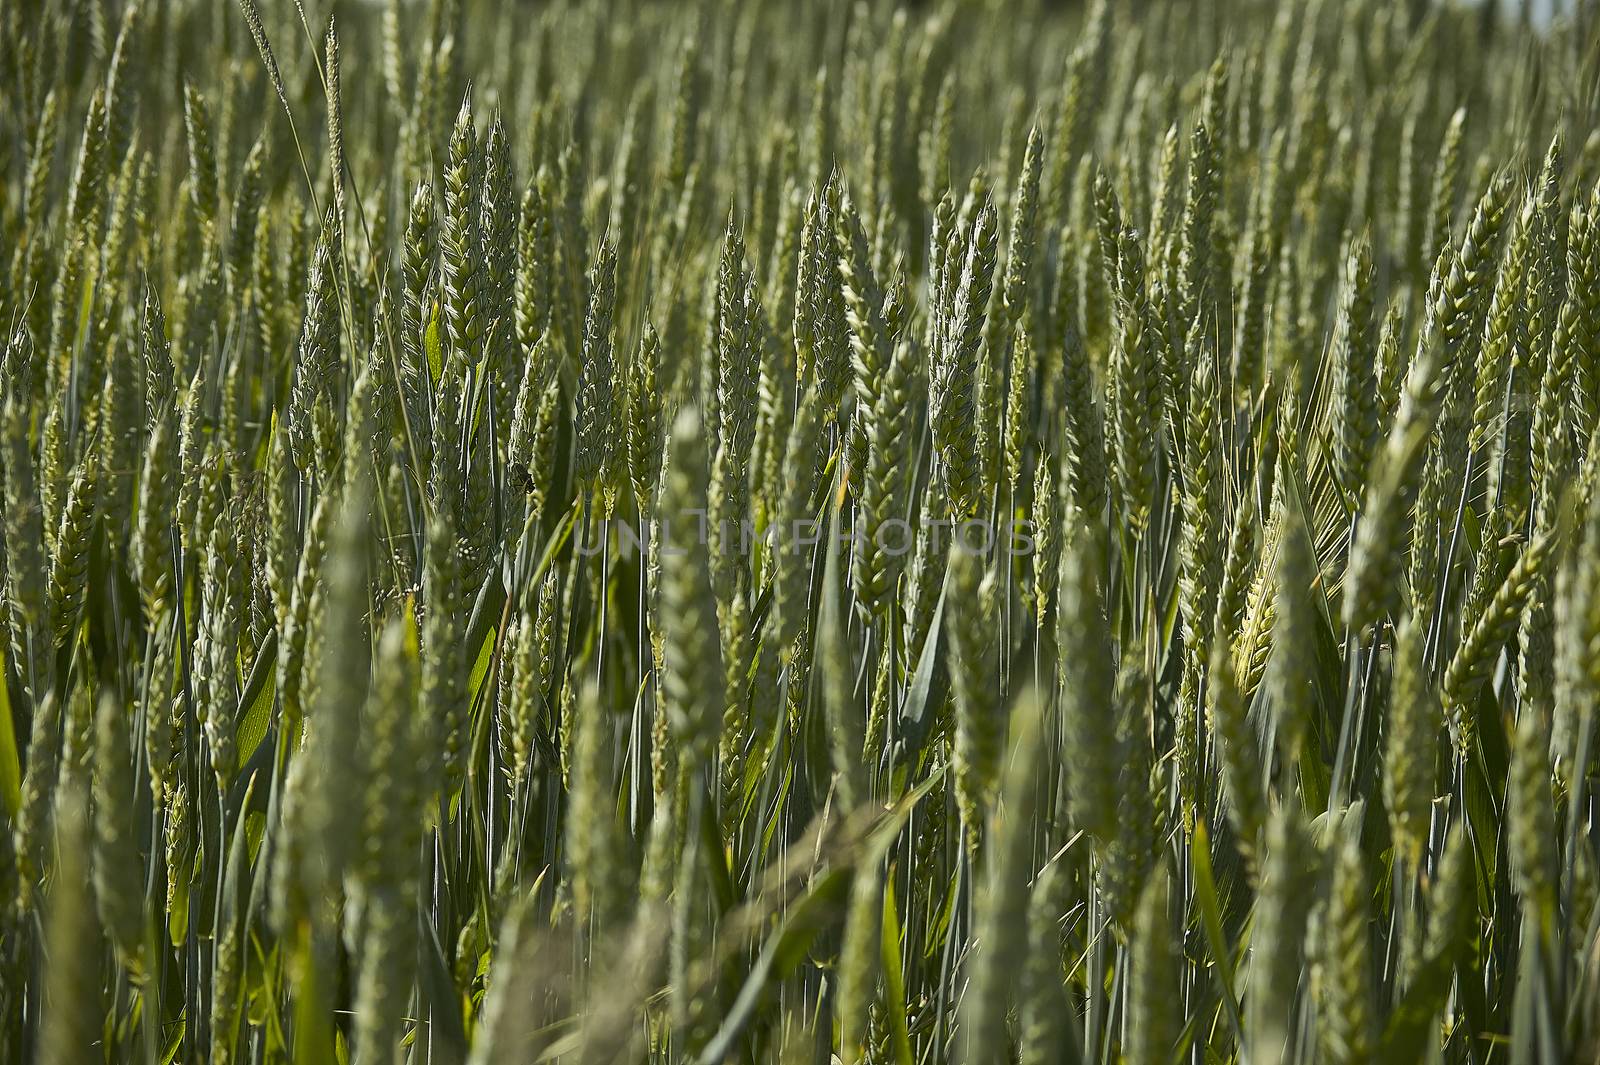 Ears of barley in a field of cultivation by pippocarlot